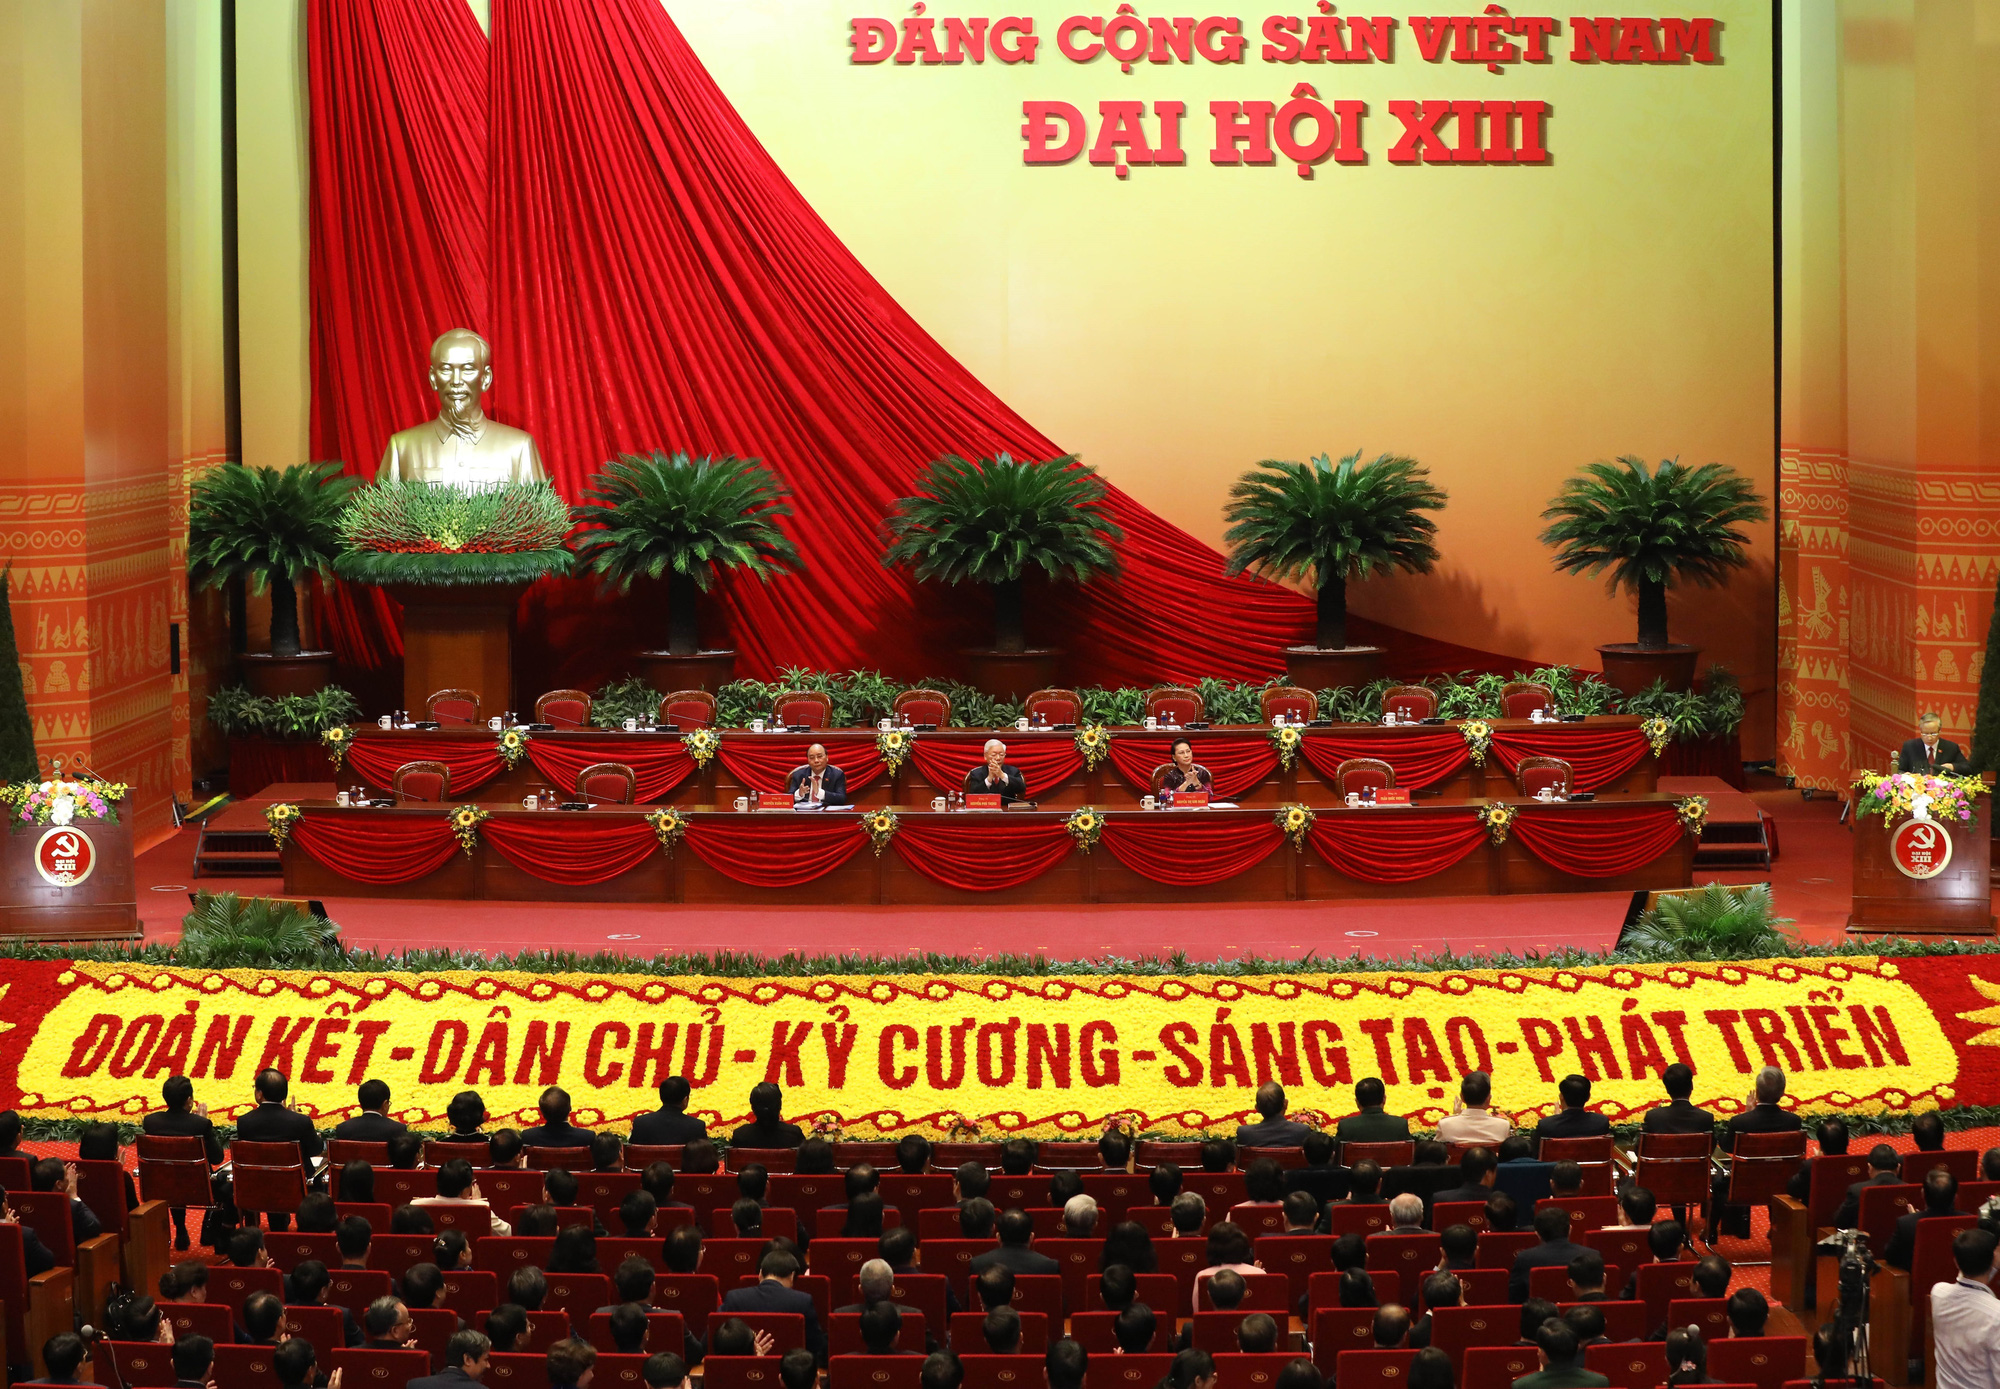 Delegates attend preparatory session of Vietnam’s 13th National Party Congress in Hanoi